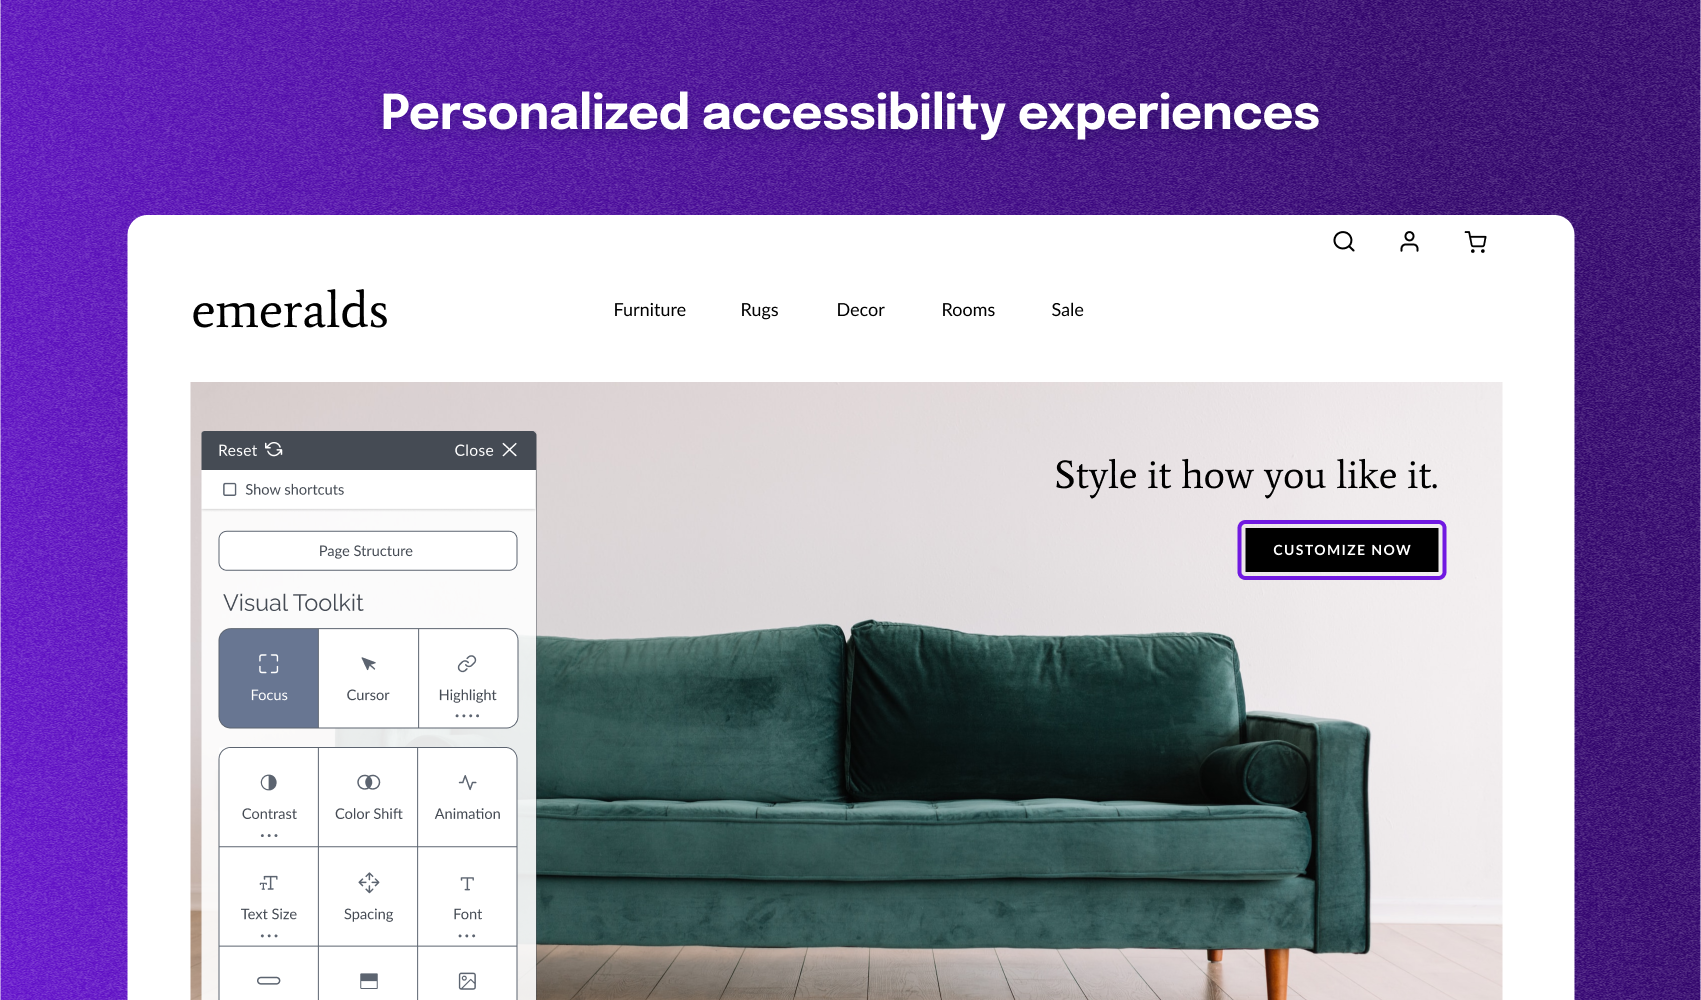 End users can personalize their accessibility experiences